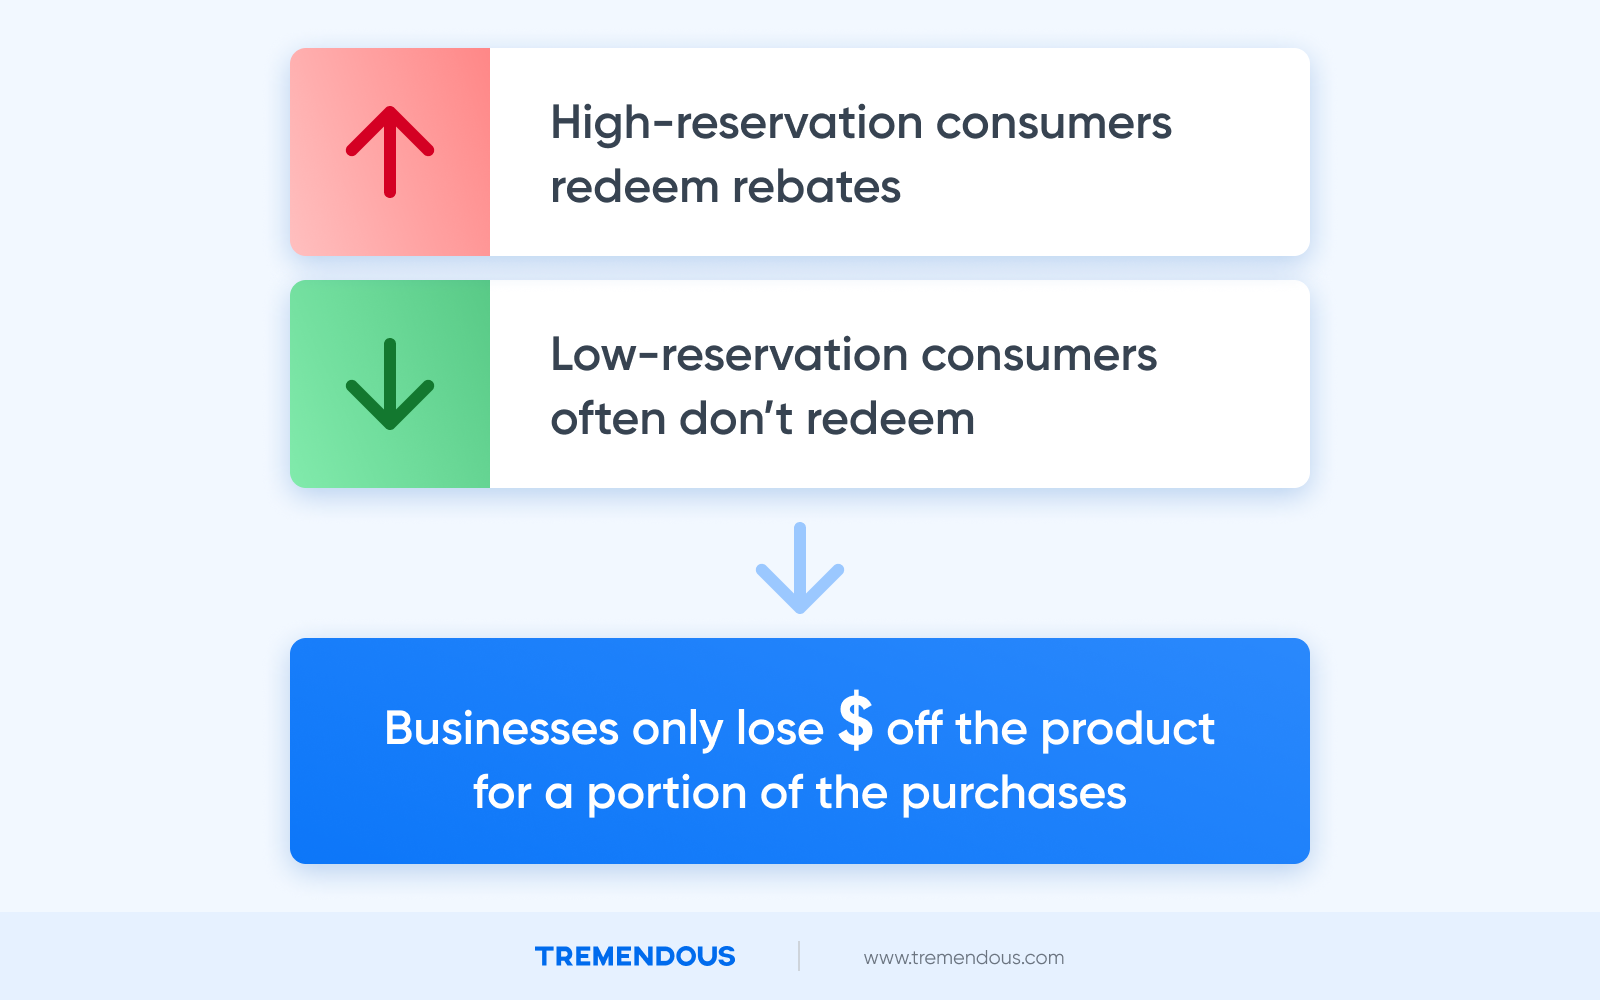 A red arrow pointing upward, accompanied by text that reads: high-reservation consumers redeem rebates. Under this is a green arrow. Next to it, text reads: low-reservation customers often don't redeem. Finally, in a blue box, text reads: businesses only lose money off the product for a portion of purchases.